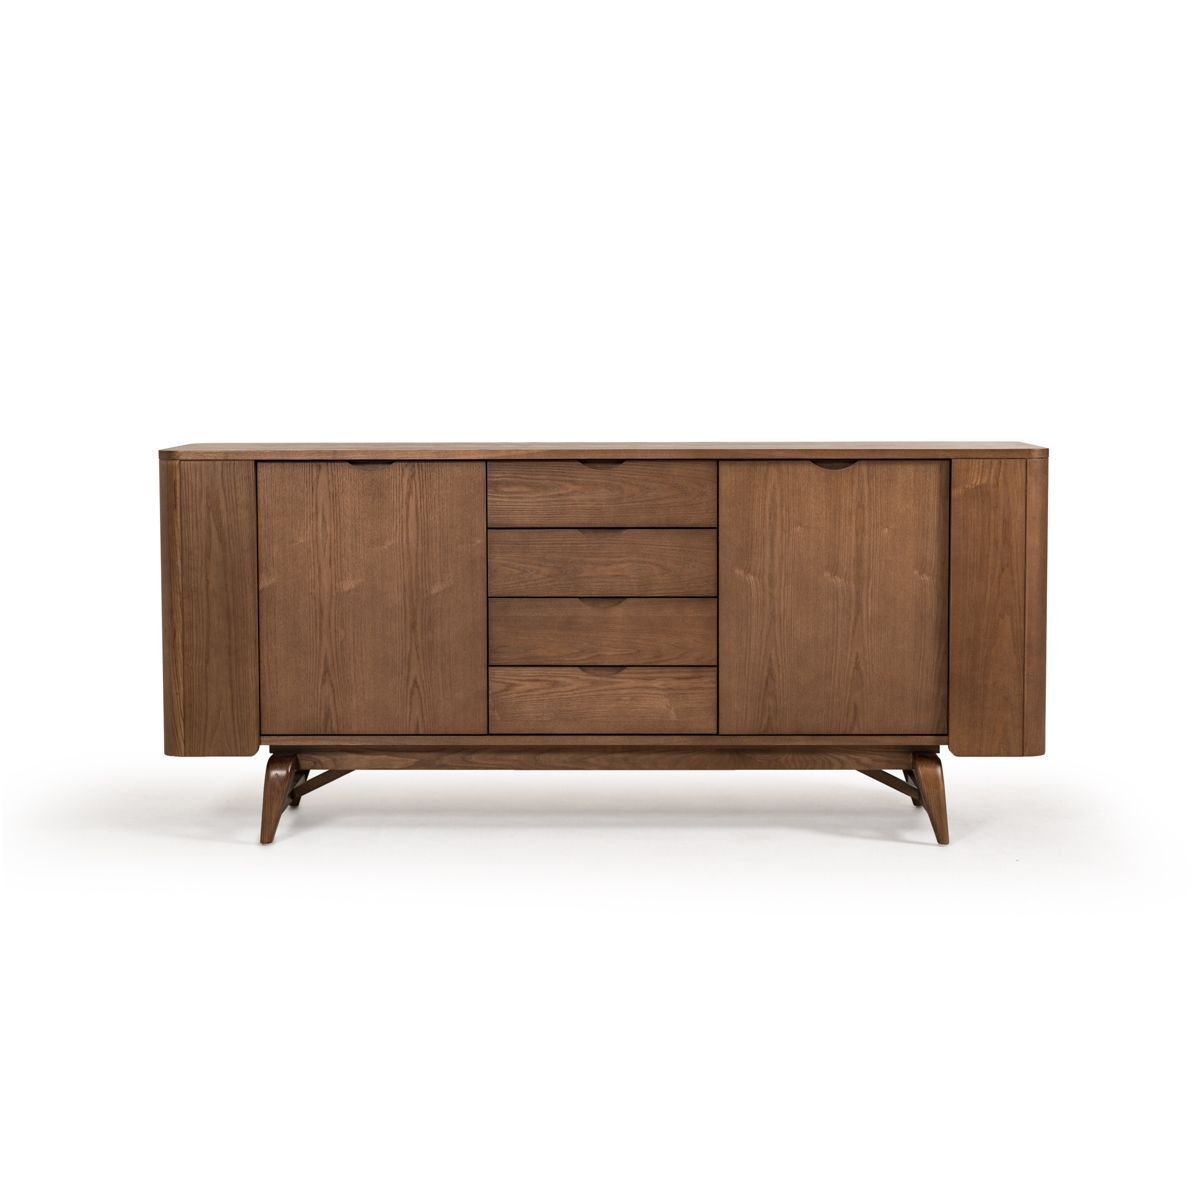 Modrest Fallon Modern Walnut Buffet | Products | Sideboard Throughout Wendell Sideboards (View 13 of 30)